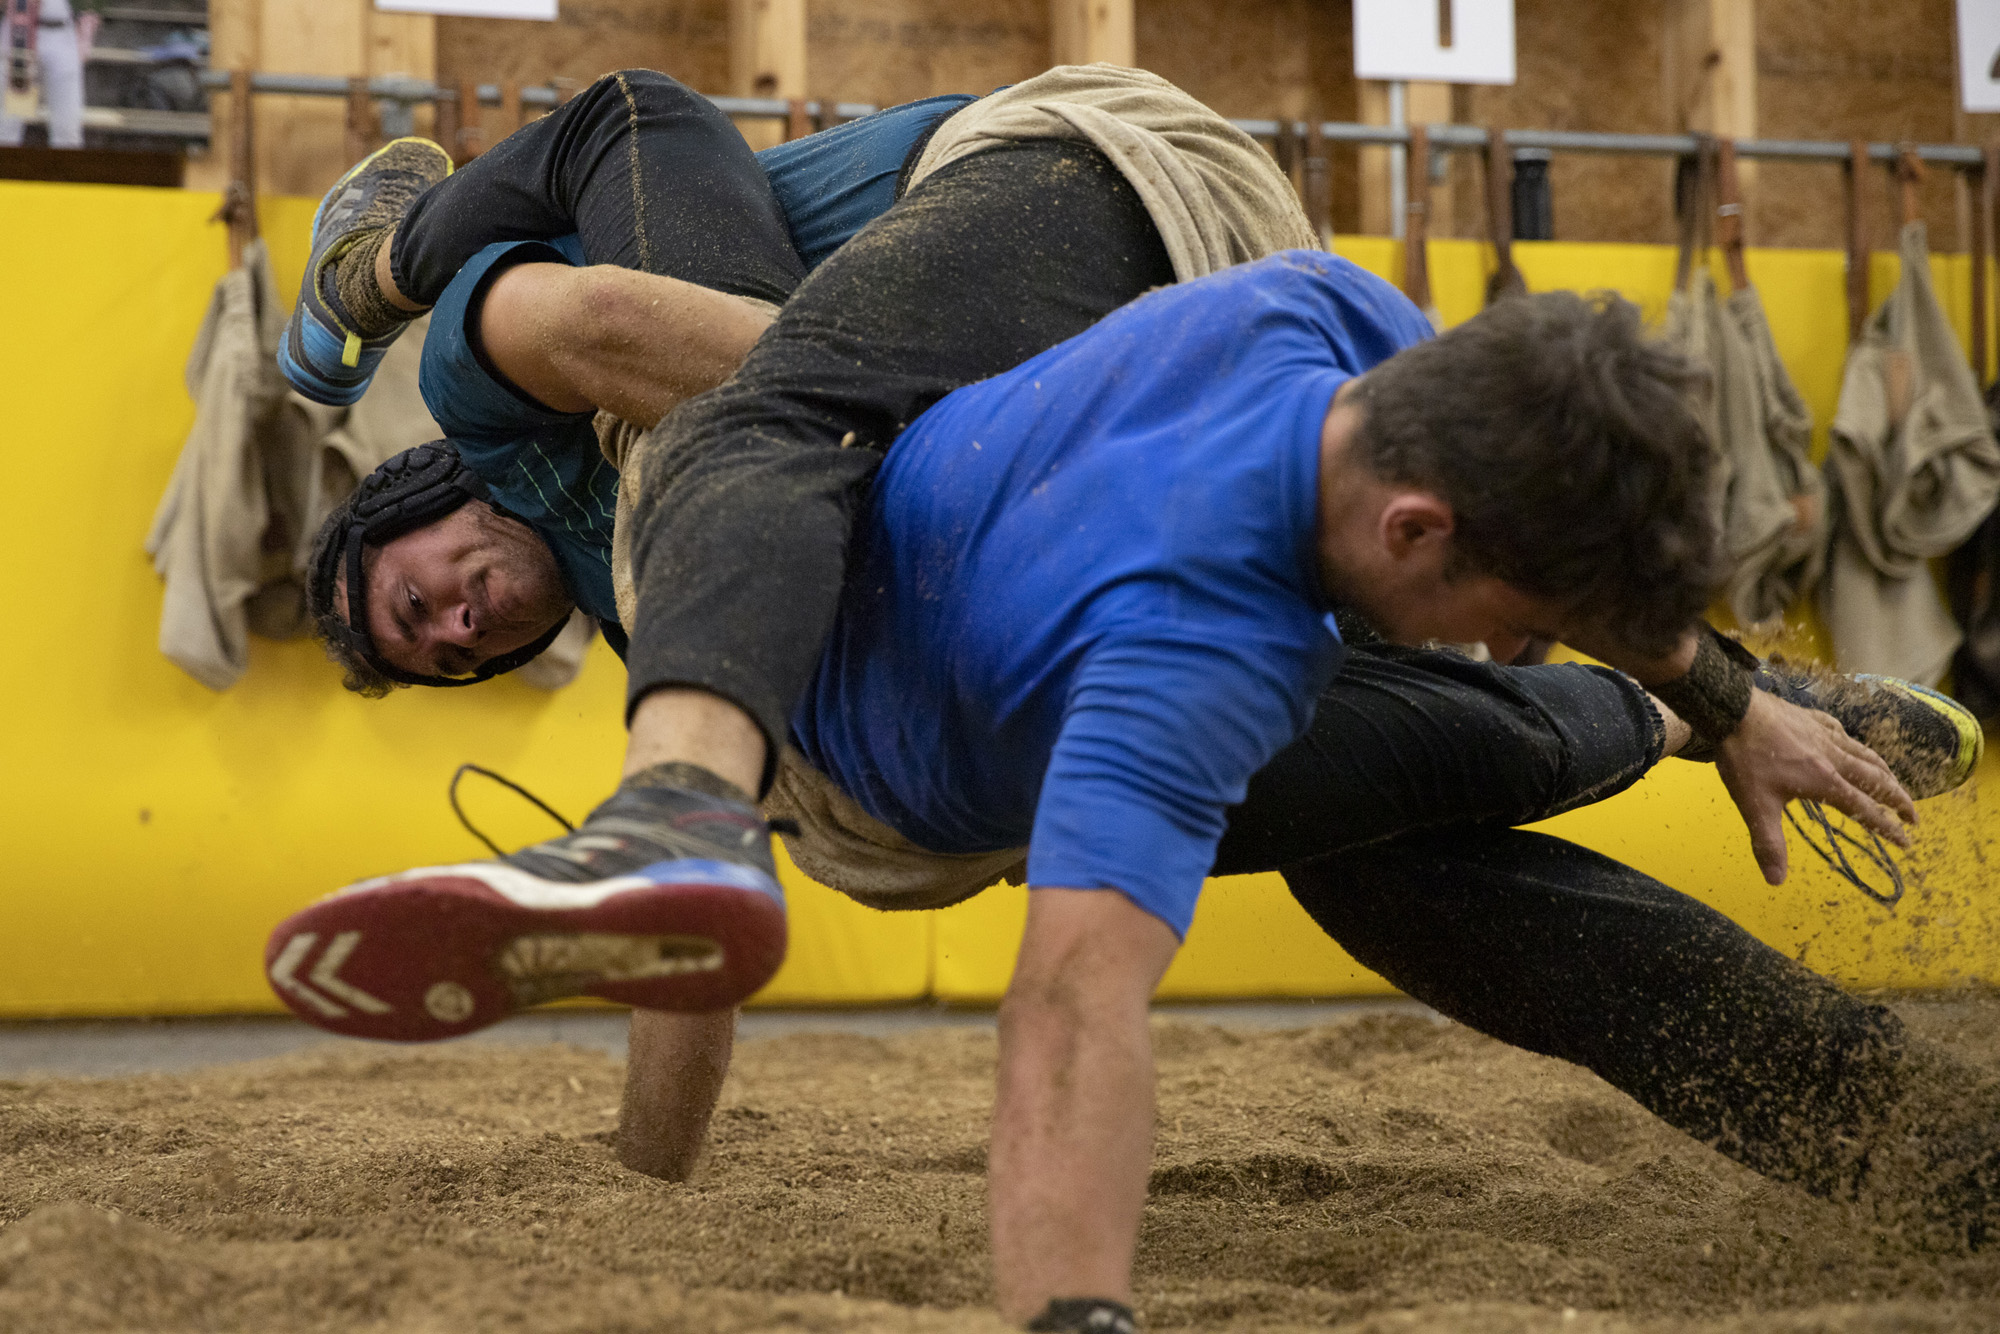 Ohio University photography student Leslie Ostronic photographed traditional Swiss Wrestling during the Visual Discovery Conference in Lucerne Switzerland.